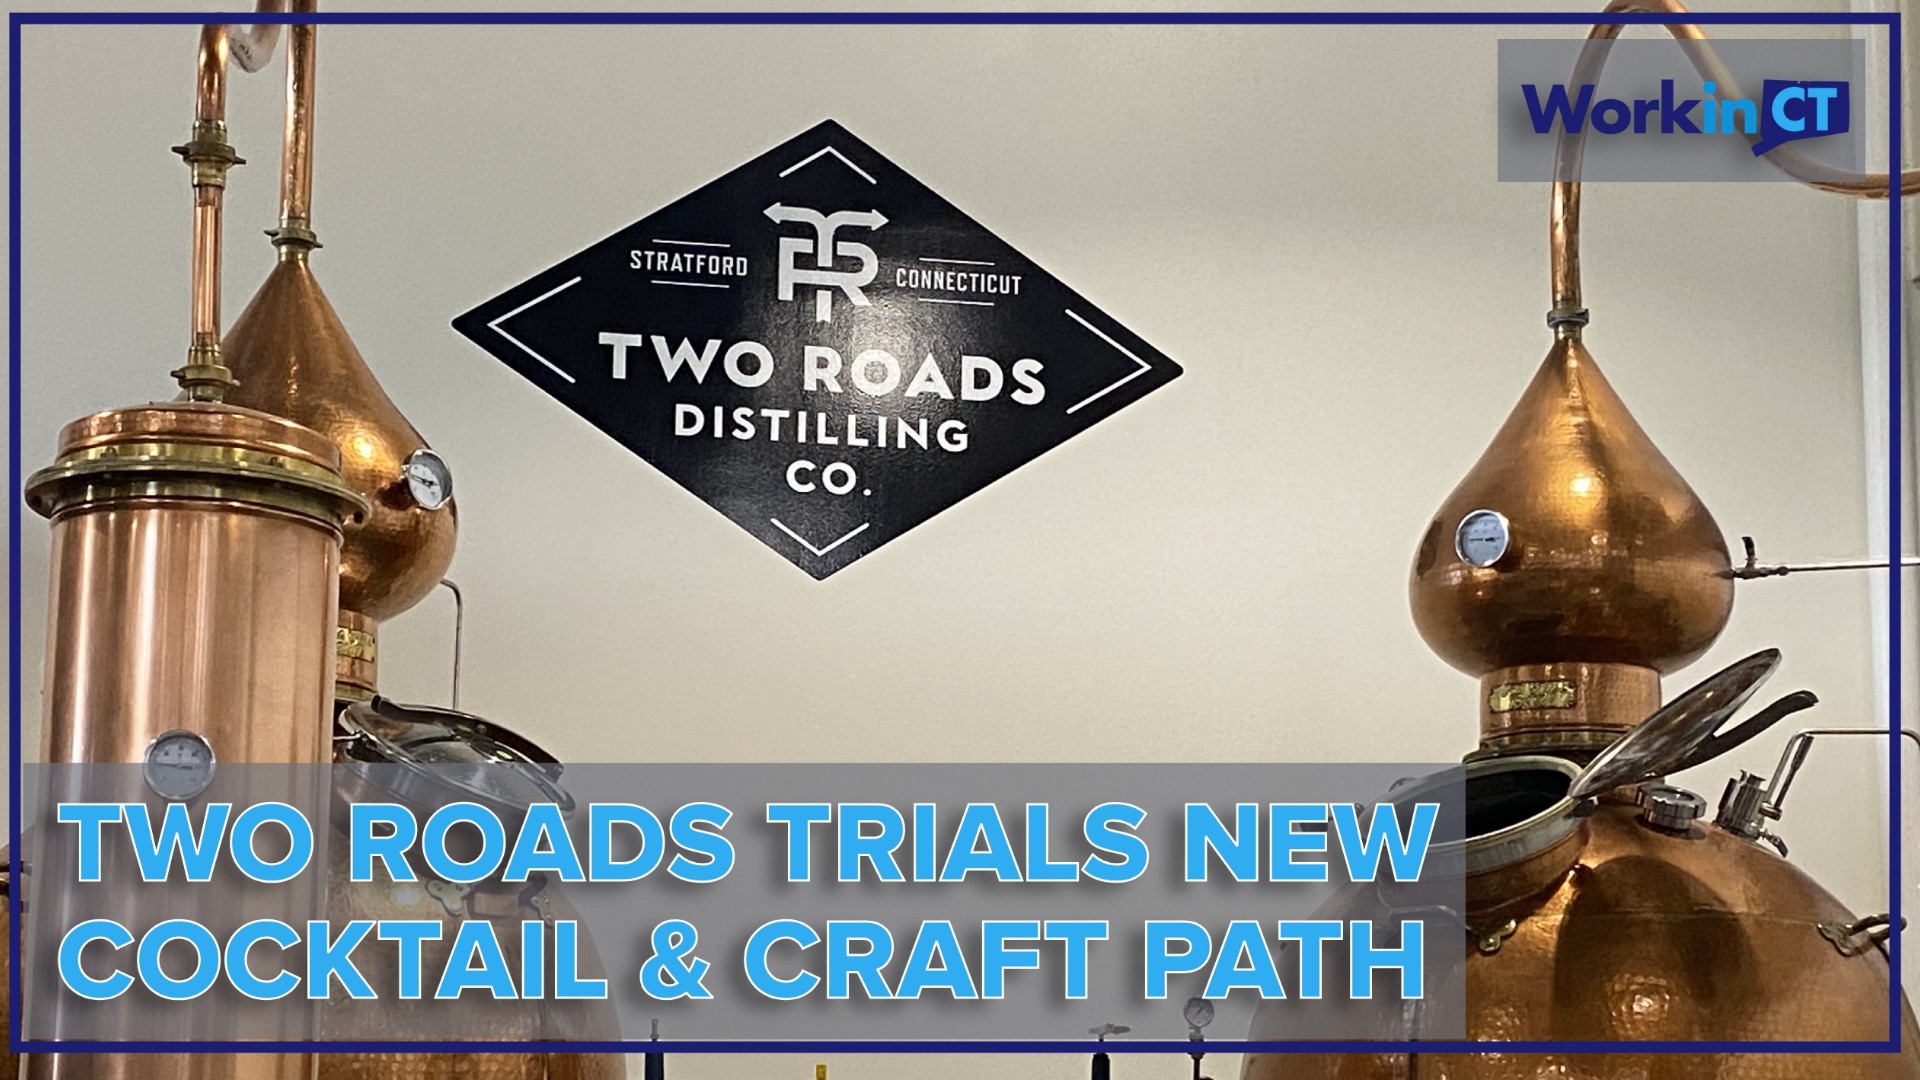 Beyond the main brewing facility, the team at Two Roads has gone down another road, and four years after it opened, “Area 2” continues to go beyond the brew.